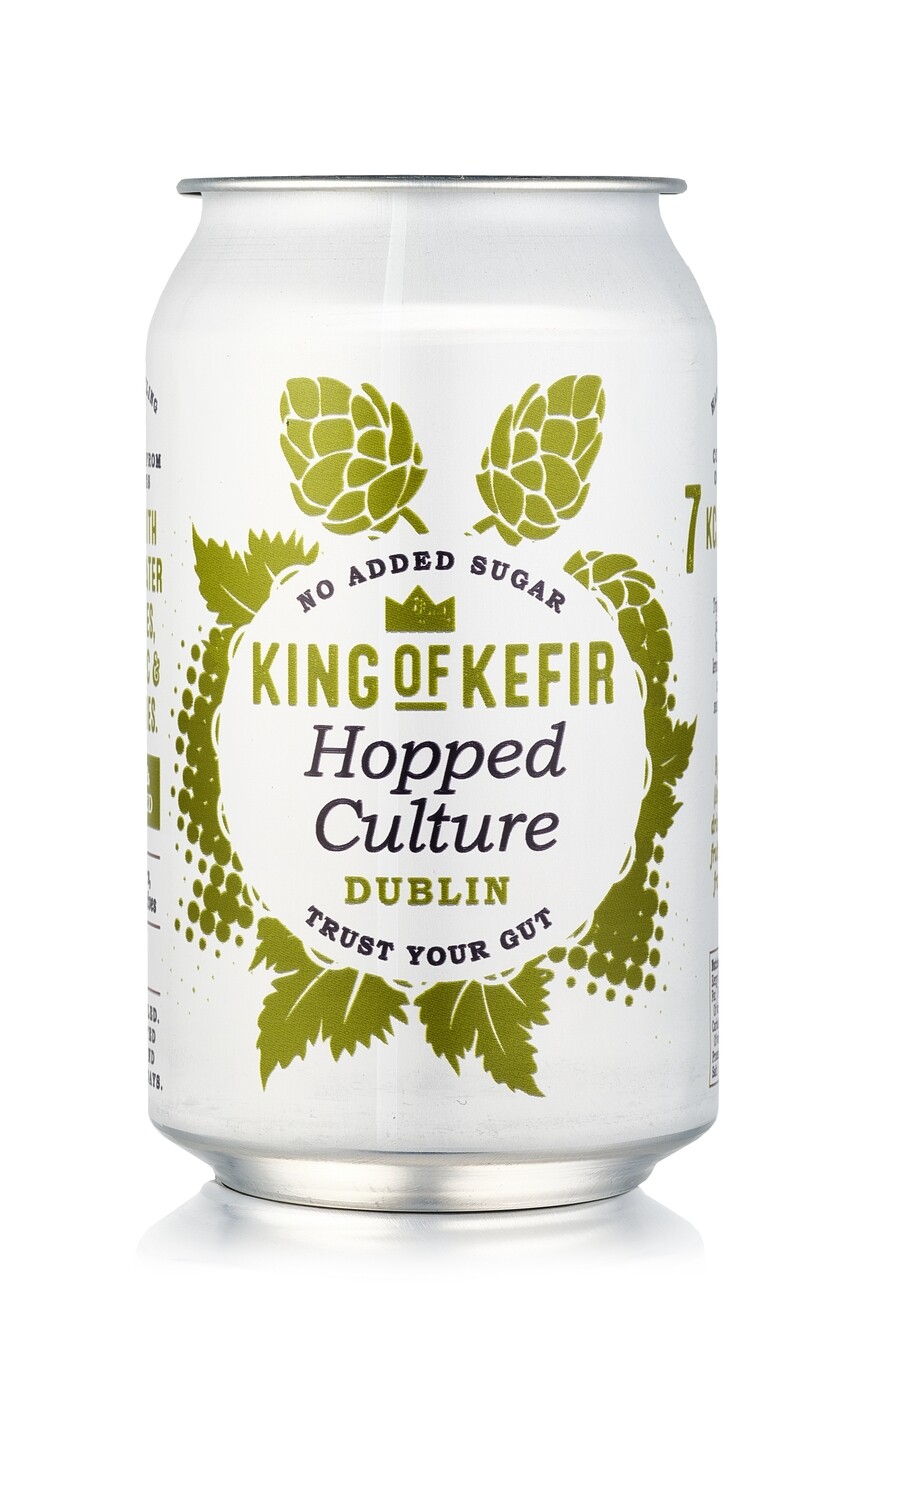 King of Kefir Hopped Culture, 12 x 330ml cans